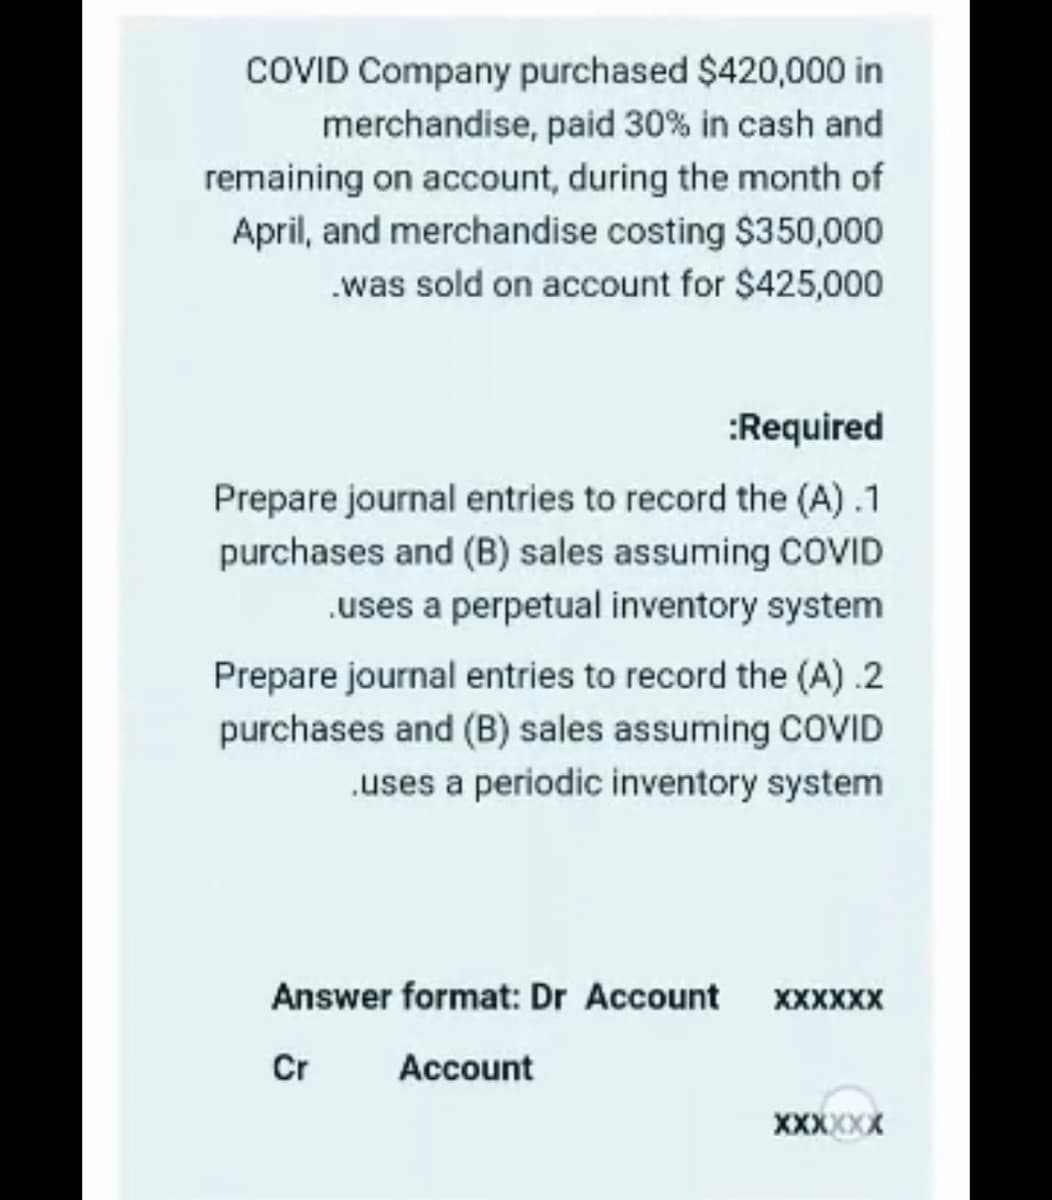 COVID Company purchased $420,000 in
merchandise, paid 30% in cash and
remaining on account, during the month of
April, and merchandise costing $350,000
.was sold on account for $425,000
:Required
Prepare journal entries to record the (A) .1
purchases and (B) sales assuming COVID
.uses a perpetual inventory system
Prepare journal entries to record the (A) .2
purchases and (B) sales assuming COVID
.uses a periodic inventory system
Answer format: Dr Account XXXXXX
Cr
Account
XXXXXX
